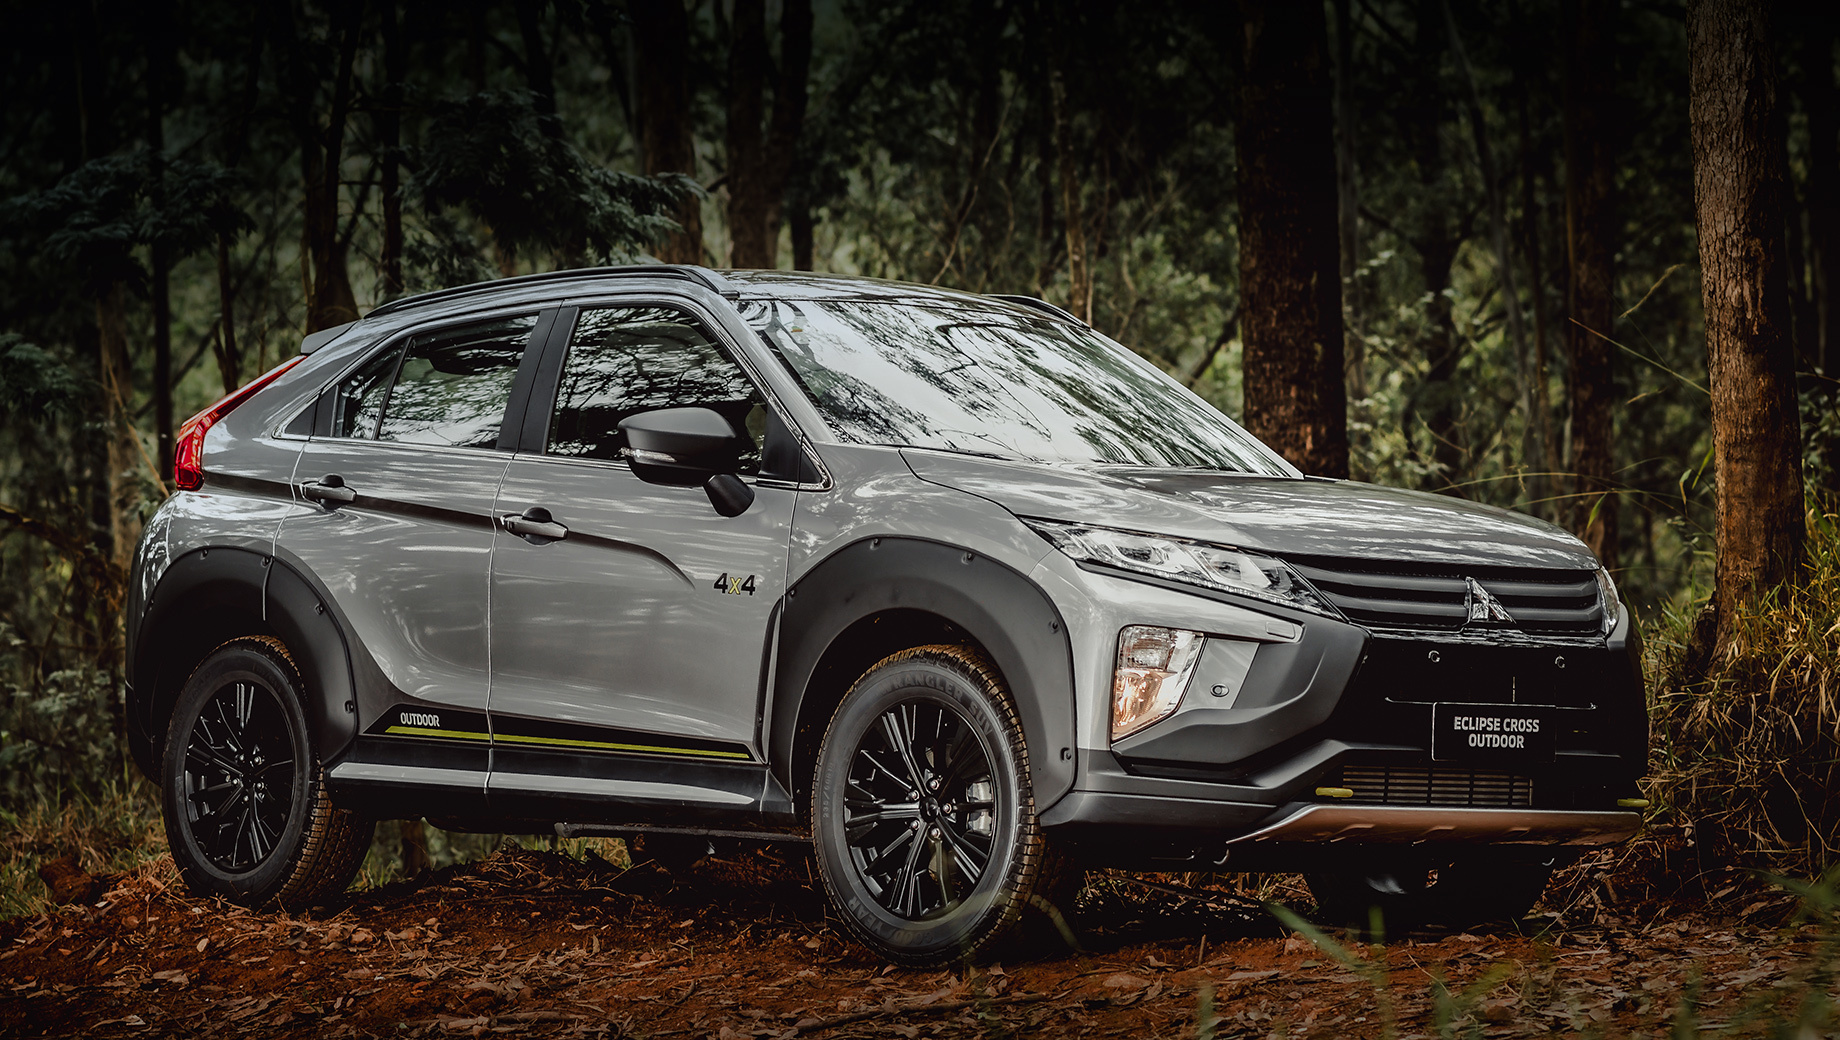 Mitsubishi Eclipse Cross got versions of Outdoor and Sport